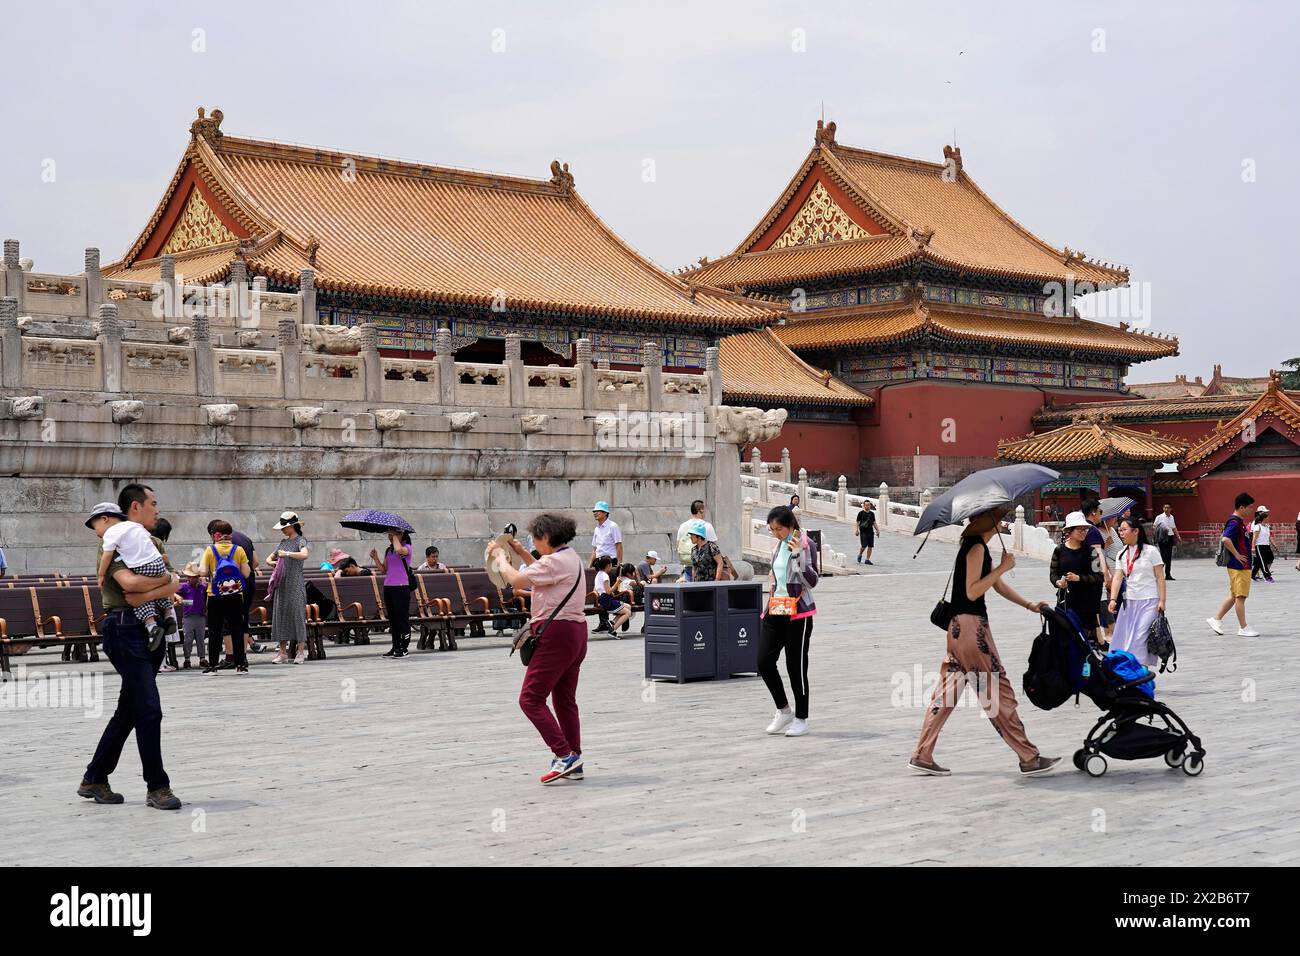 China, Beijing, Forbidden City, UNESCO World Heritage Site, Visitors walk across a wide square in front of imperial Chinese architecture, Forbidden Stock Photo